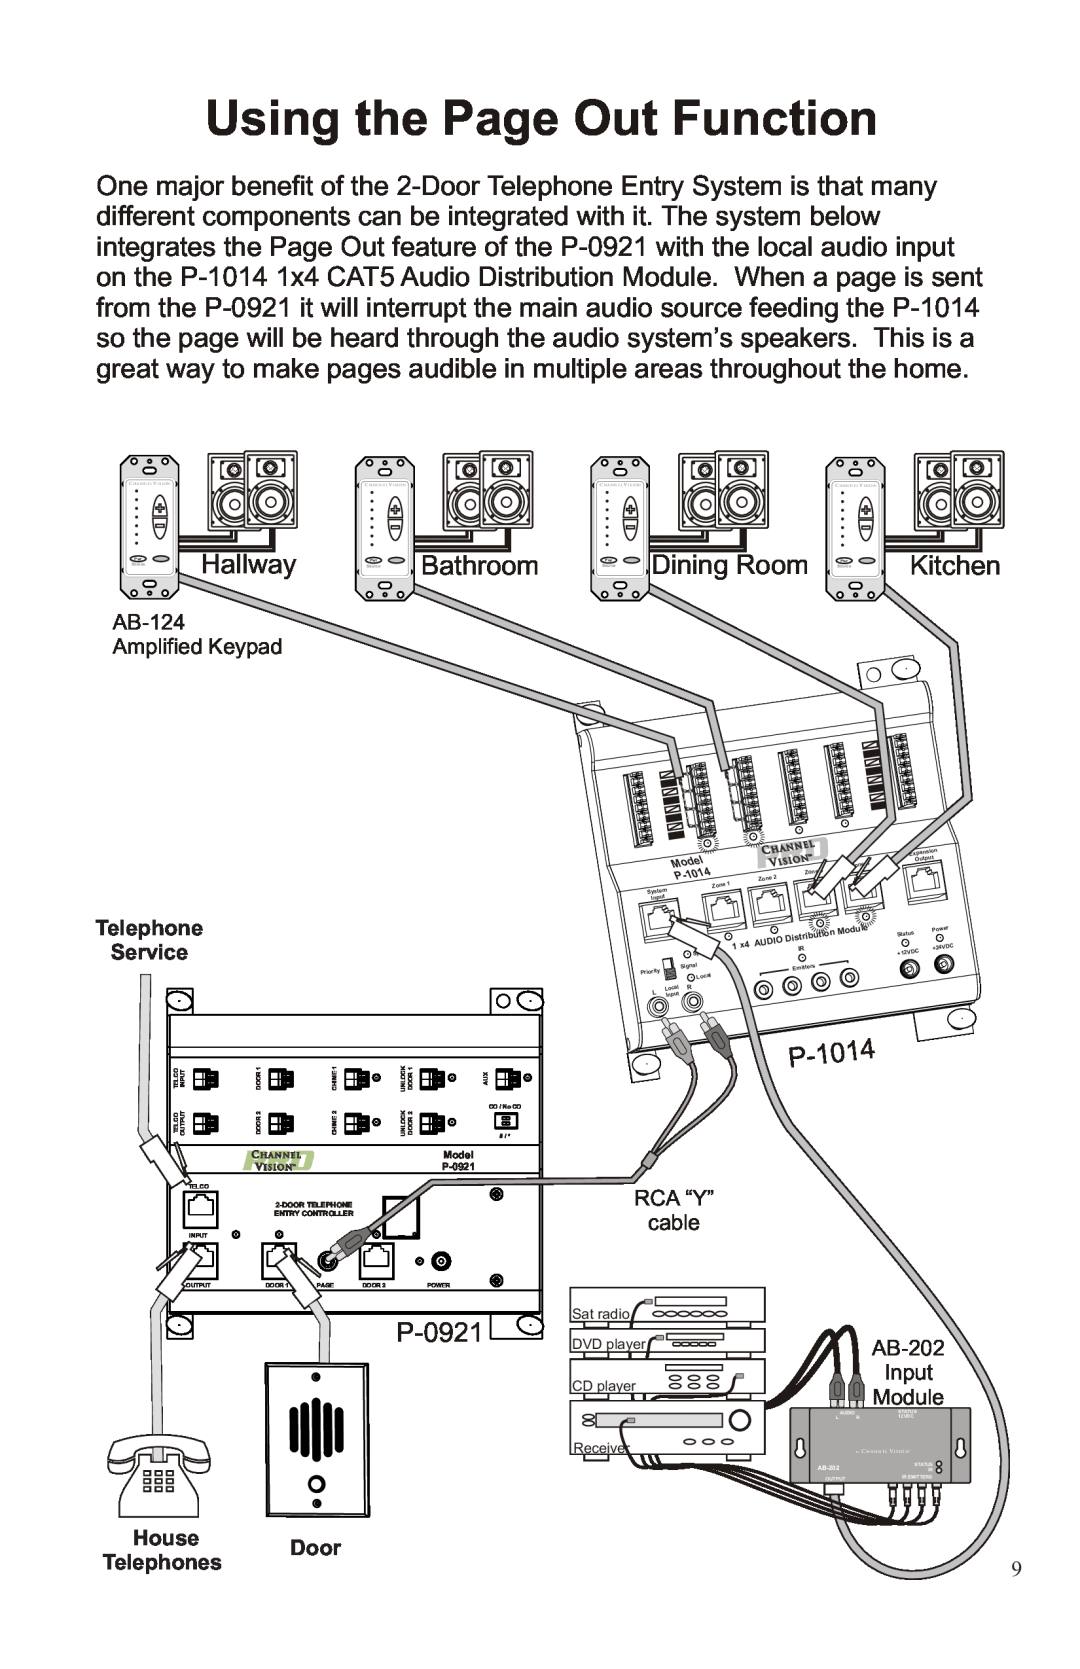 Channel Vision P-0921 manual Using the Page Out Function, Hallway, Bathroom, Dining Room, Kitchen 